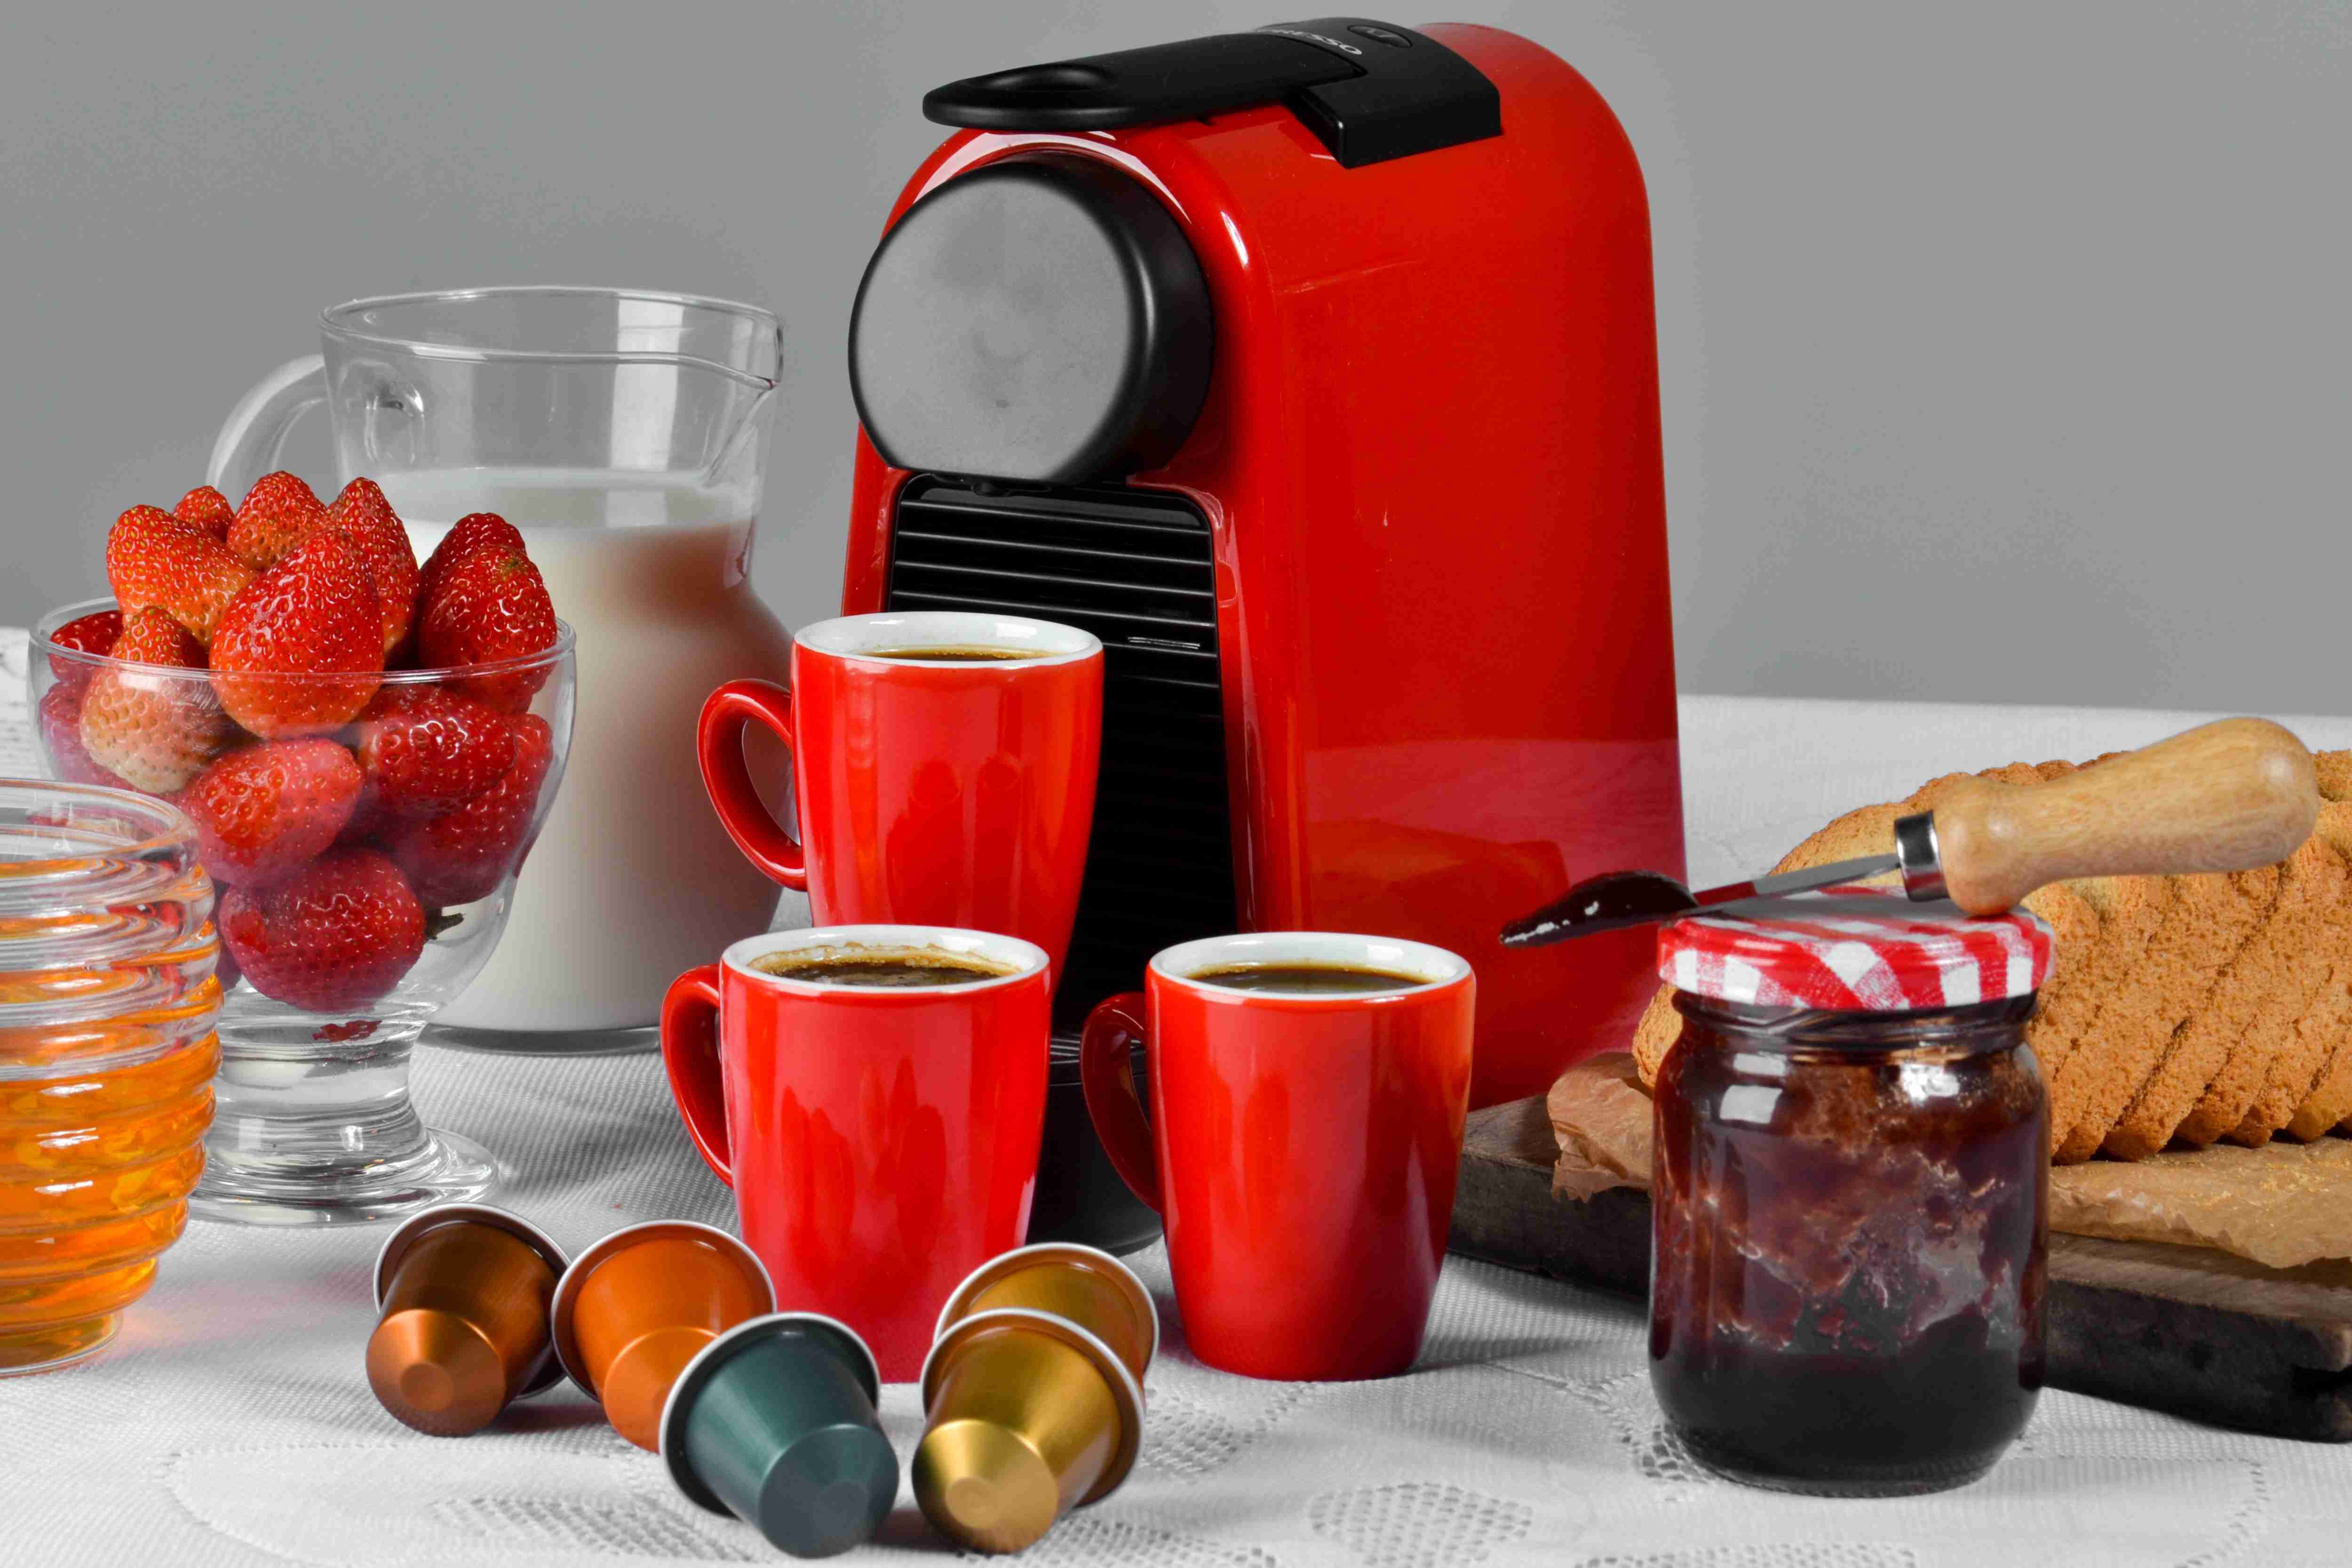 Coffee makers can be a great gift for that coffee enthusiasts